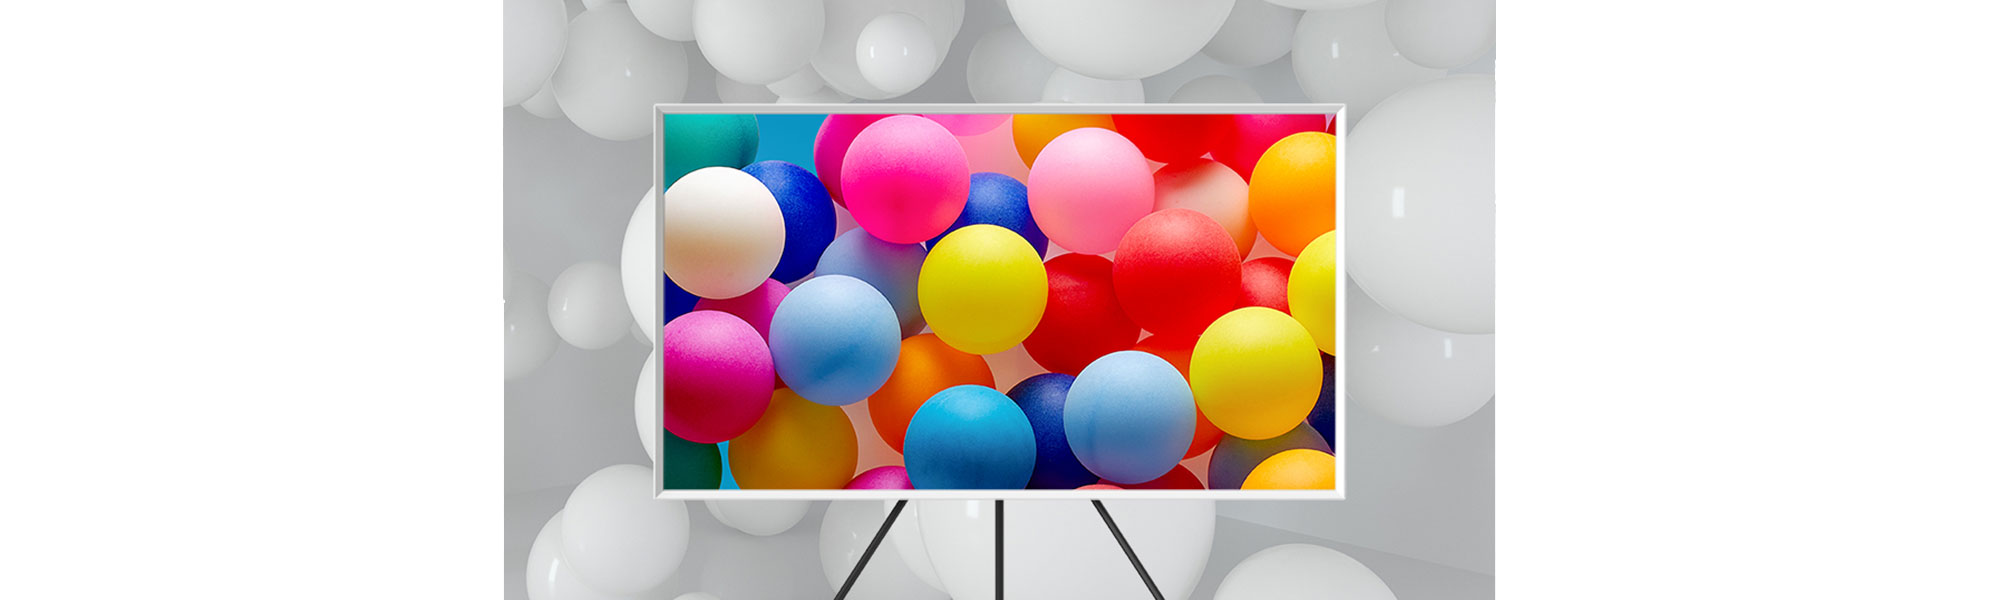 TV with colorful balloons on the screen, and white balloons behind the TV